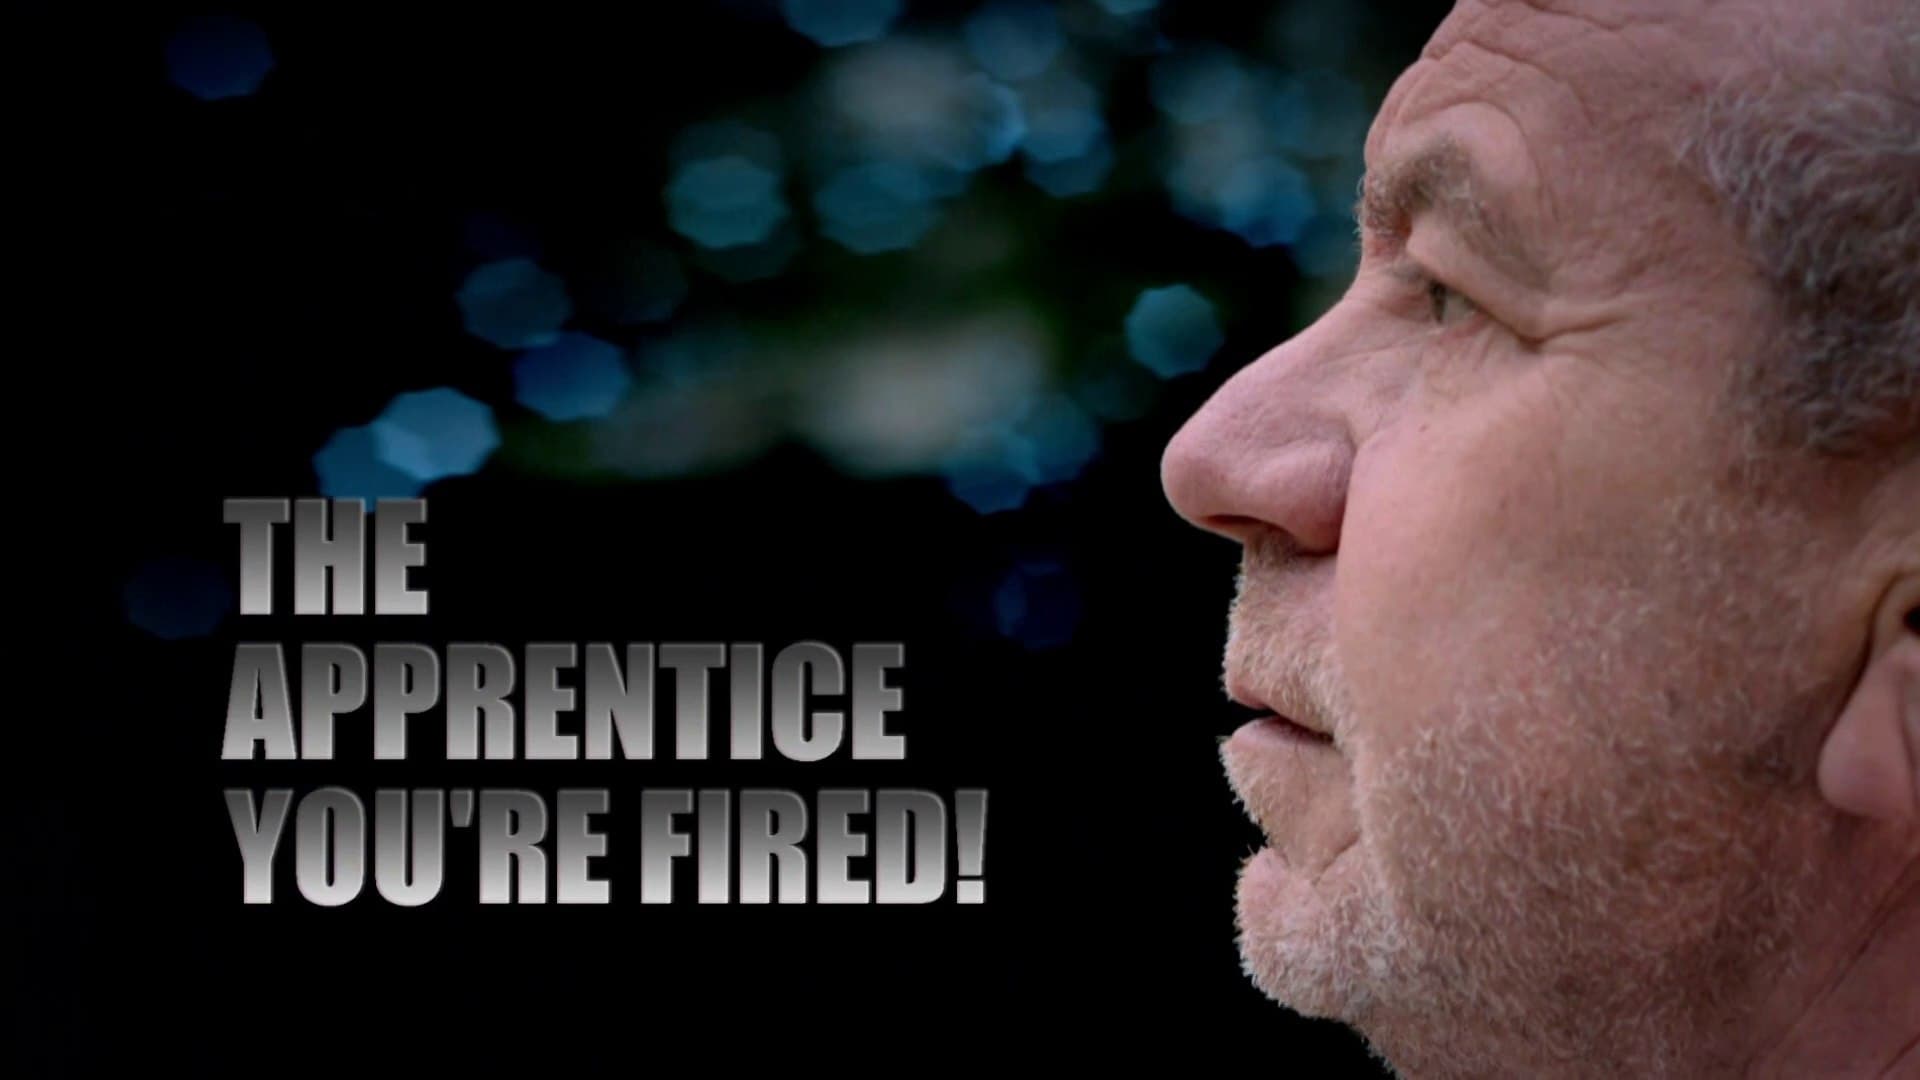 The Apprentice: You're Fired! - Season 17 Episode 1